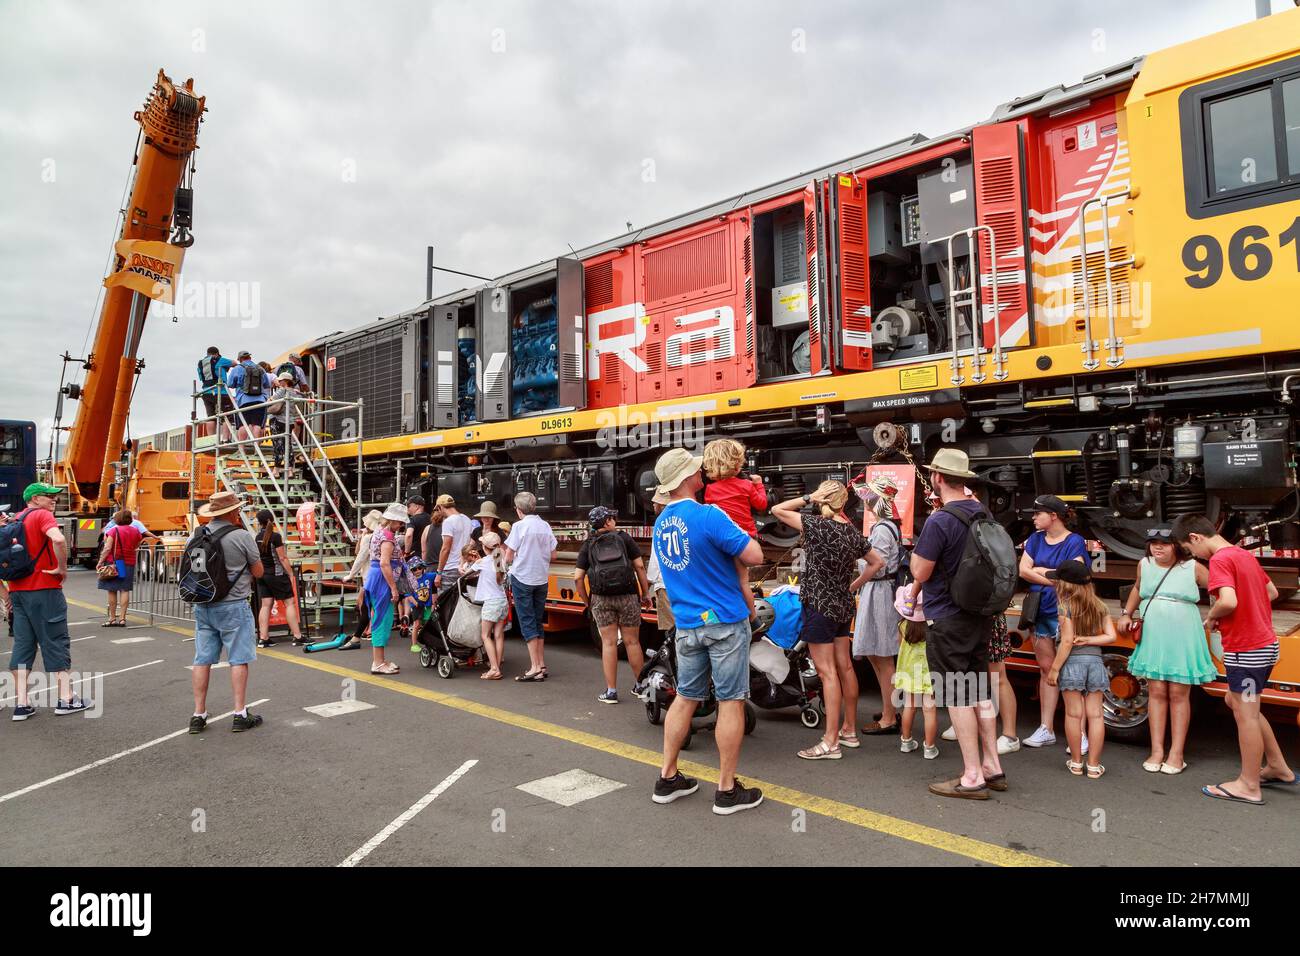 A DL-class diesel-electric locomotive operated by KiwiRail on public display in Auckland, New Zealand Stock Photo